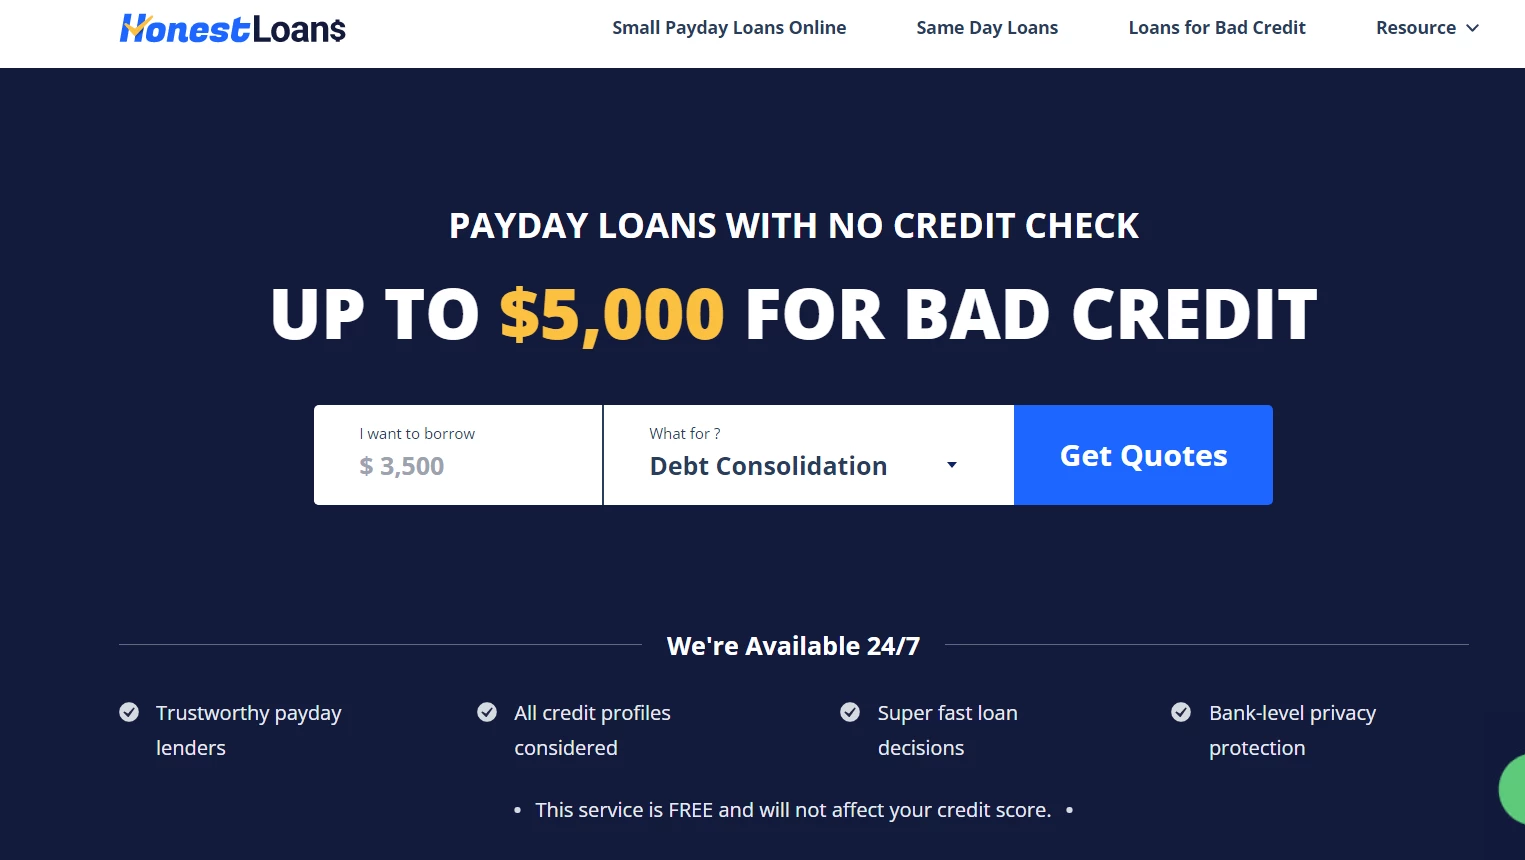 How Do Instant Payday Loans Work